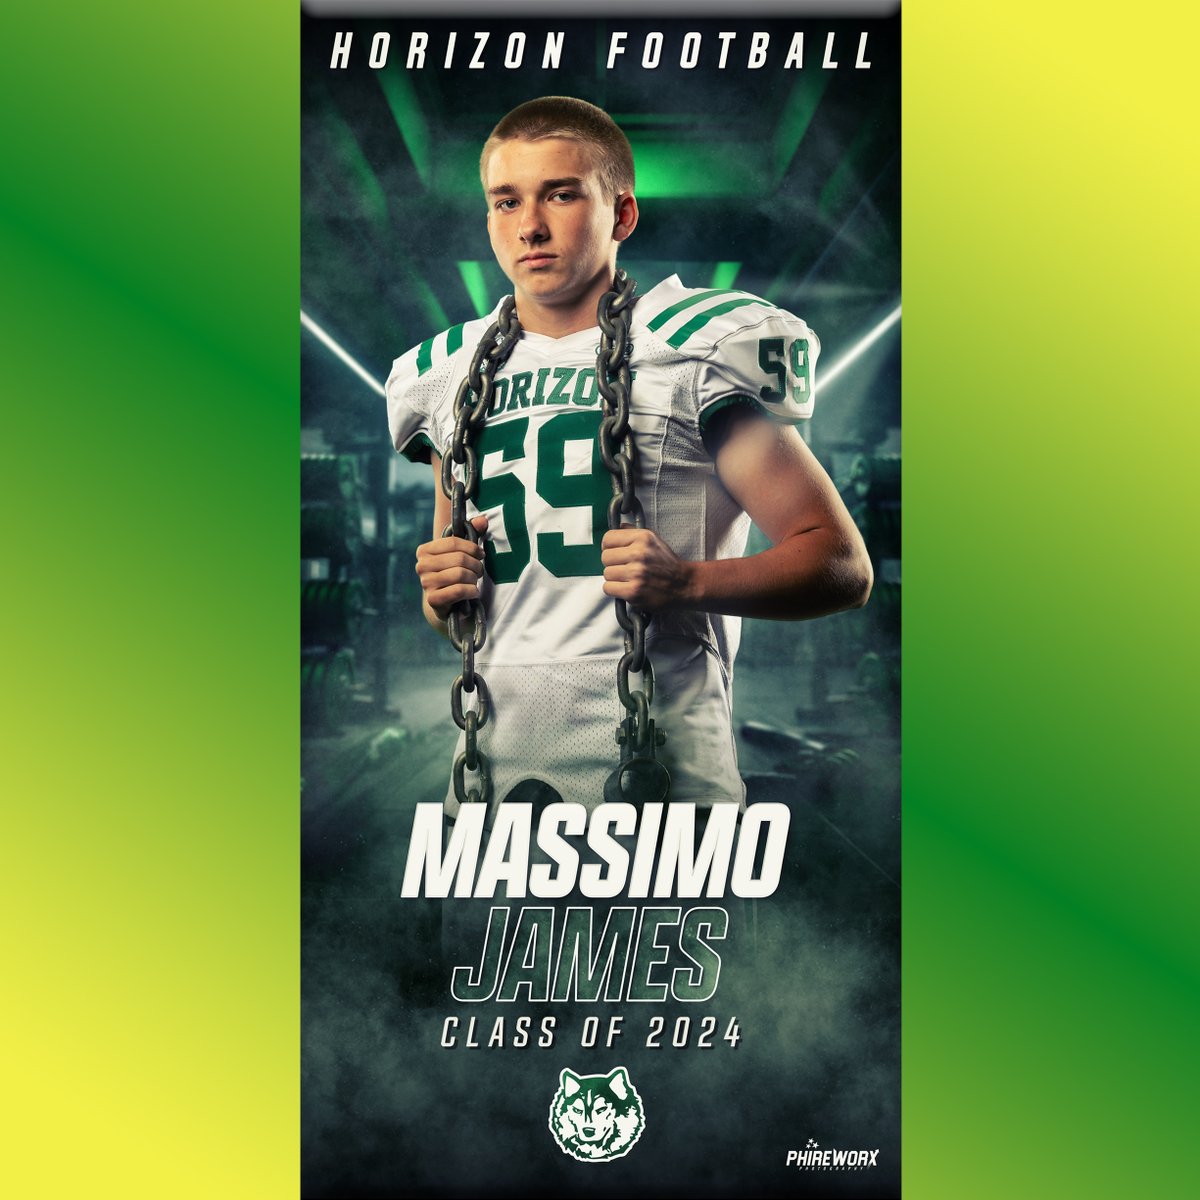 Last shoutout to our Sr. #59 Massimo James. Best of luck to you with your future endeavors! #Huskyfamily @HorizonFootball @HHSathleticsAZ @PVUSDATHLETICS